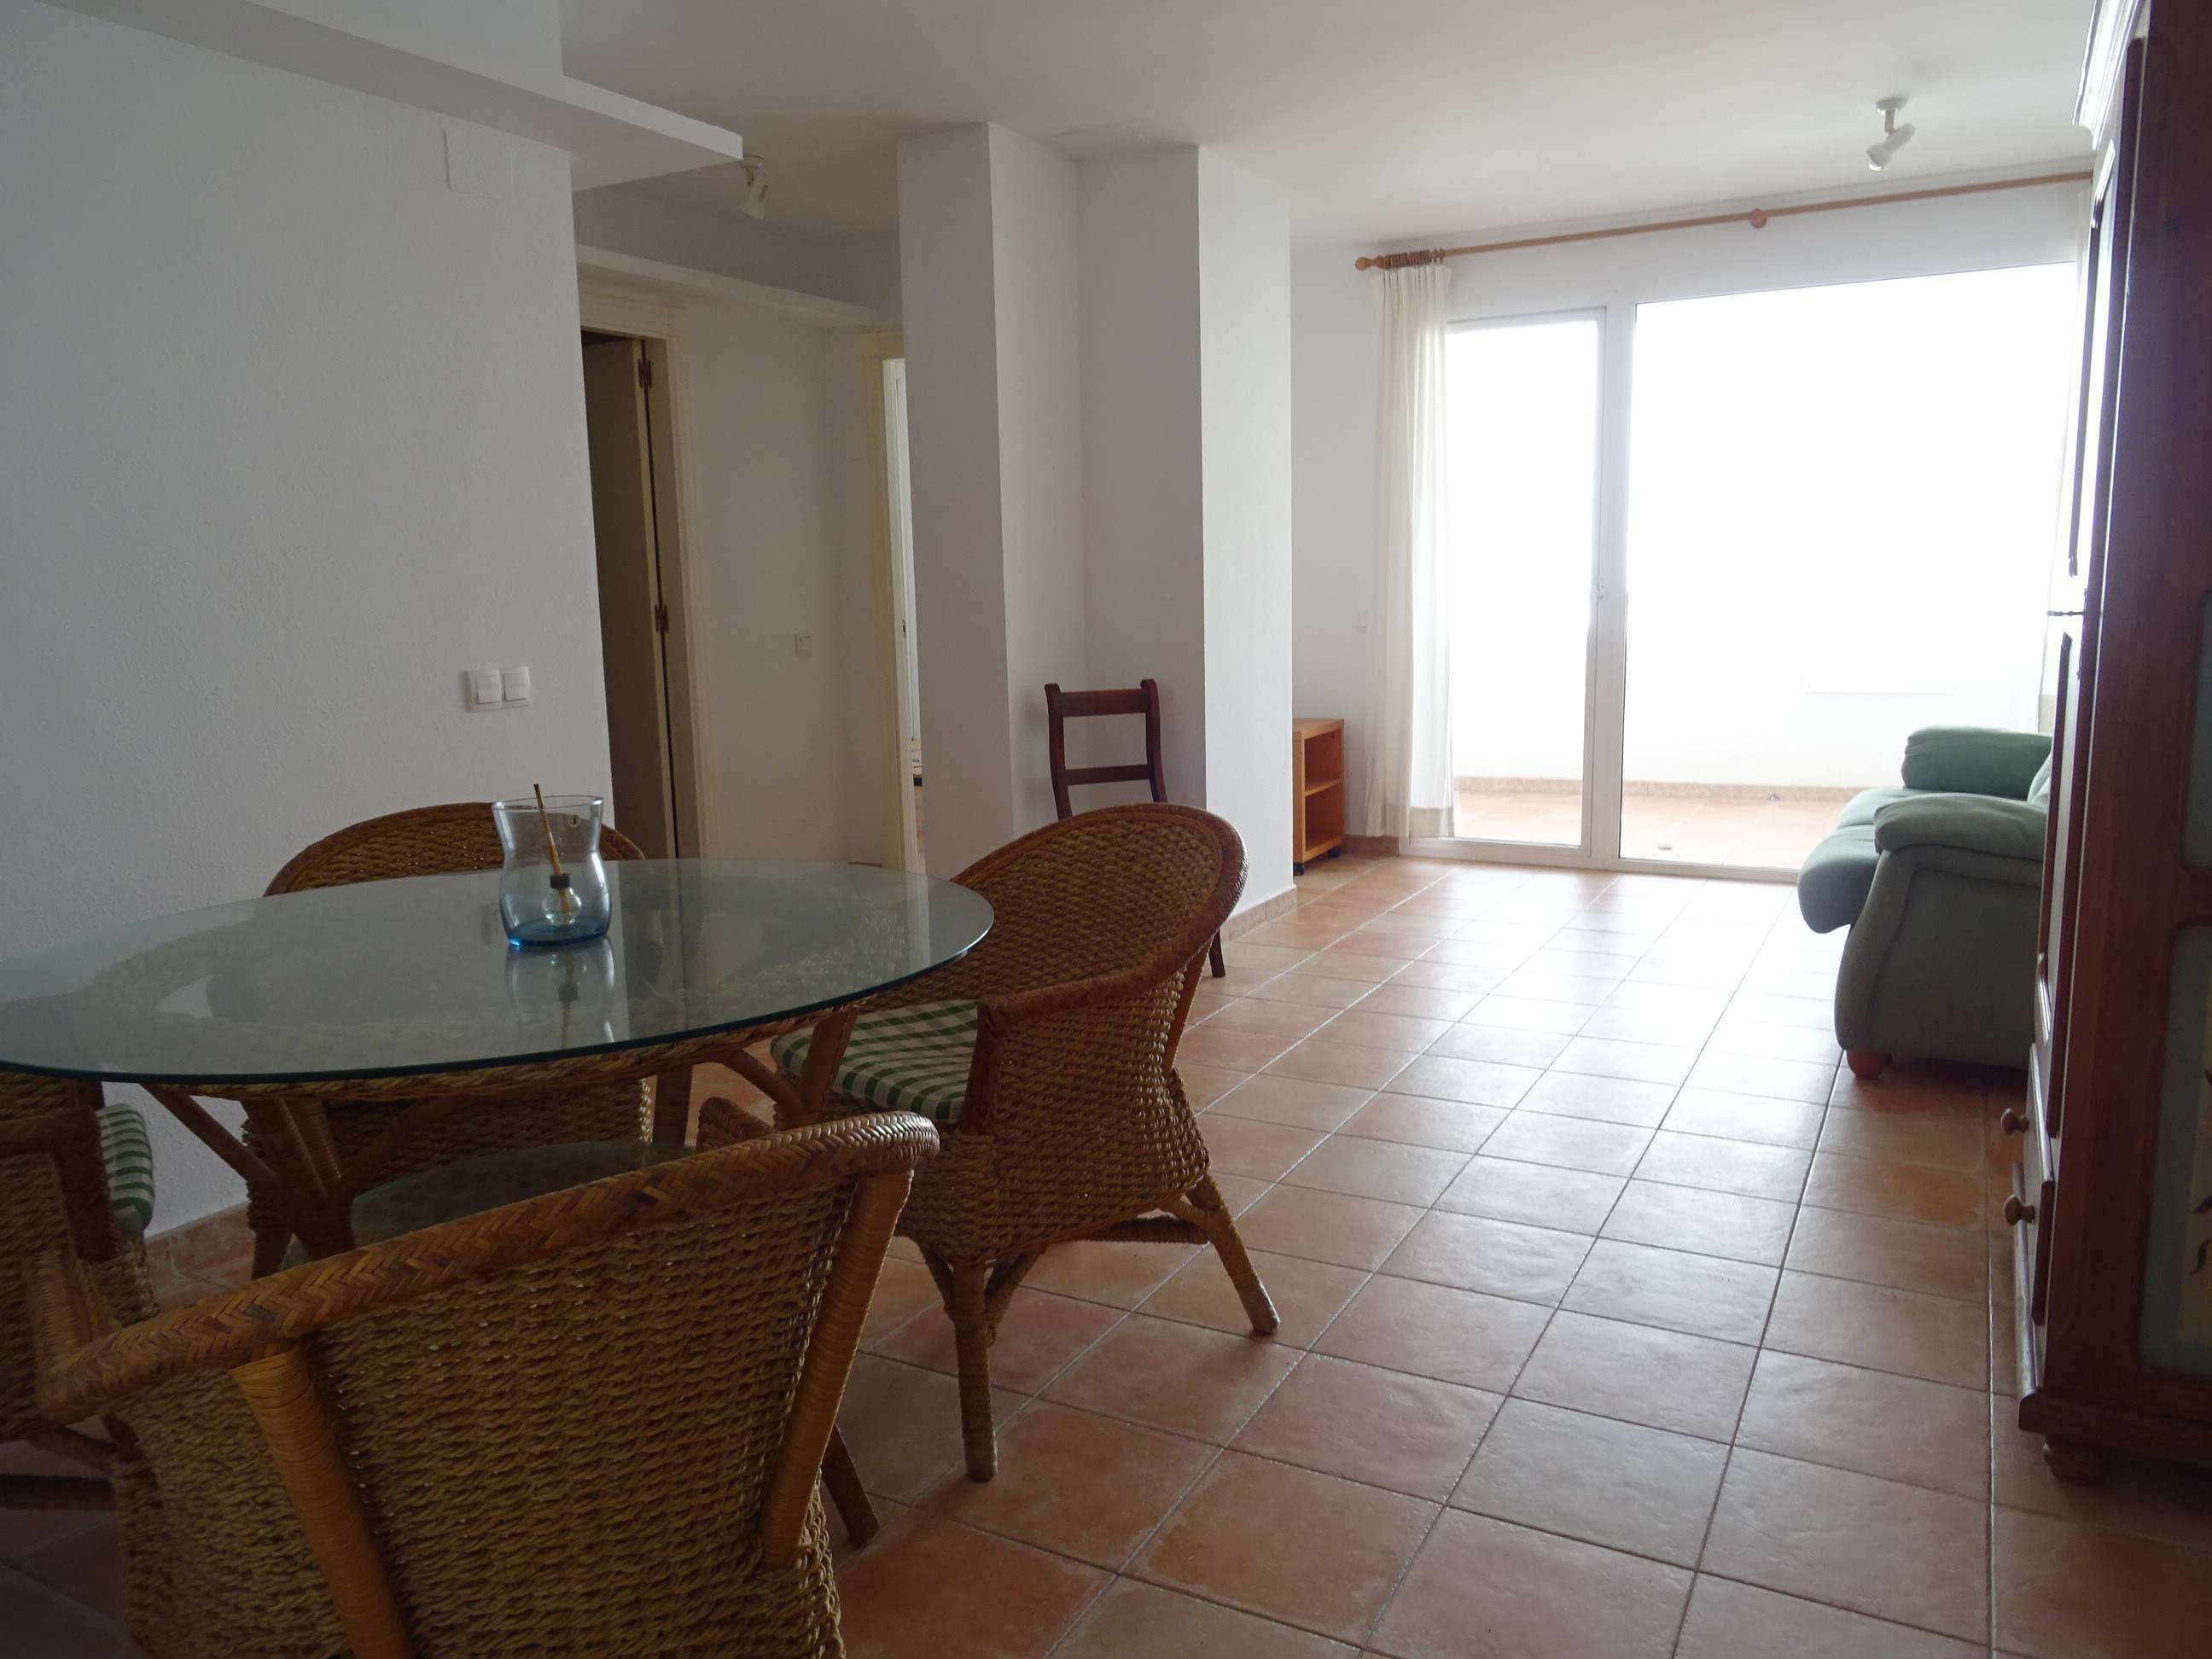 Beautiful apartment with sea views in Cap Negret